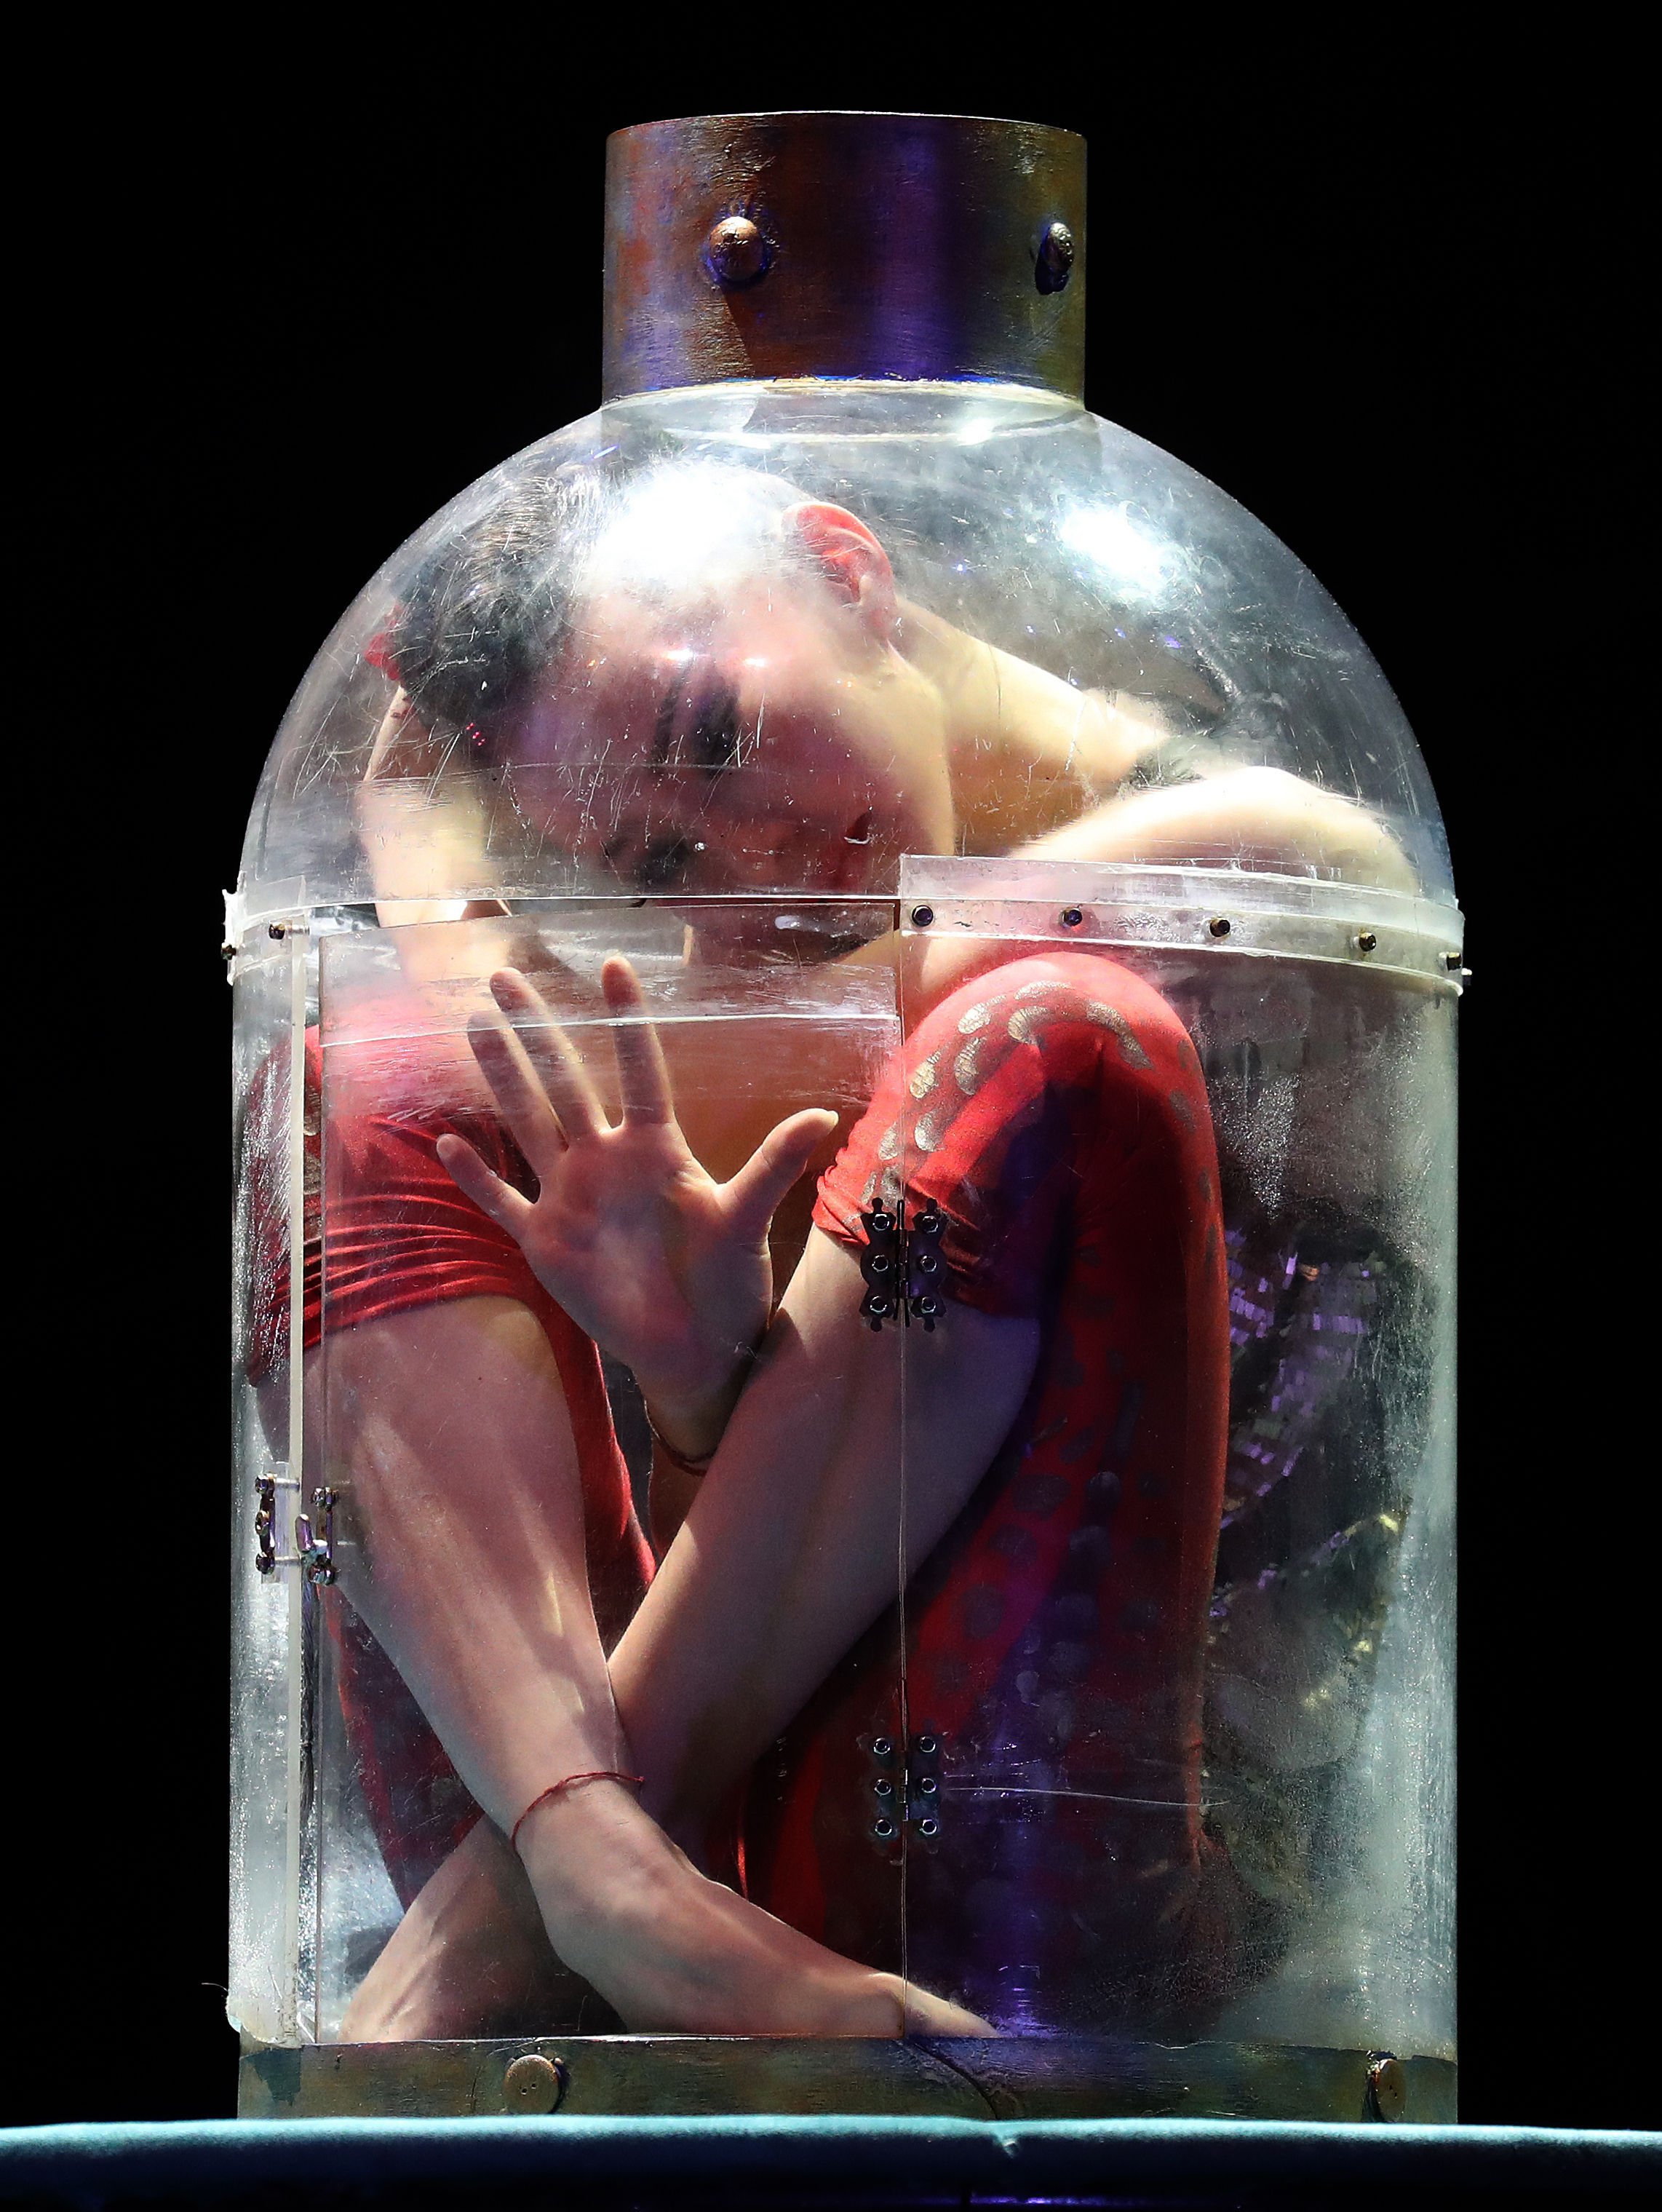 Odka pours herself into a bottle (Andrew Milligan)